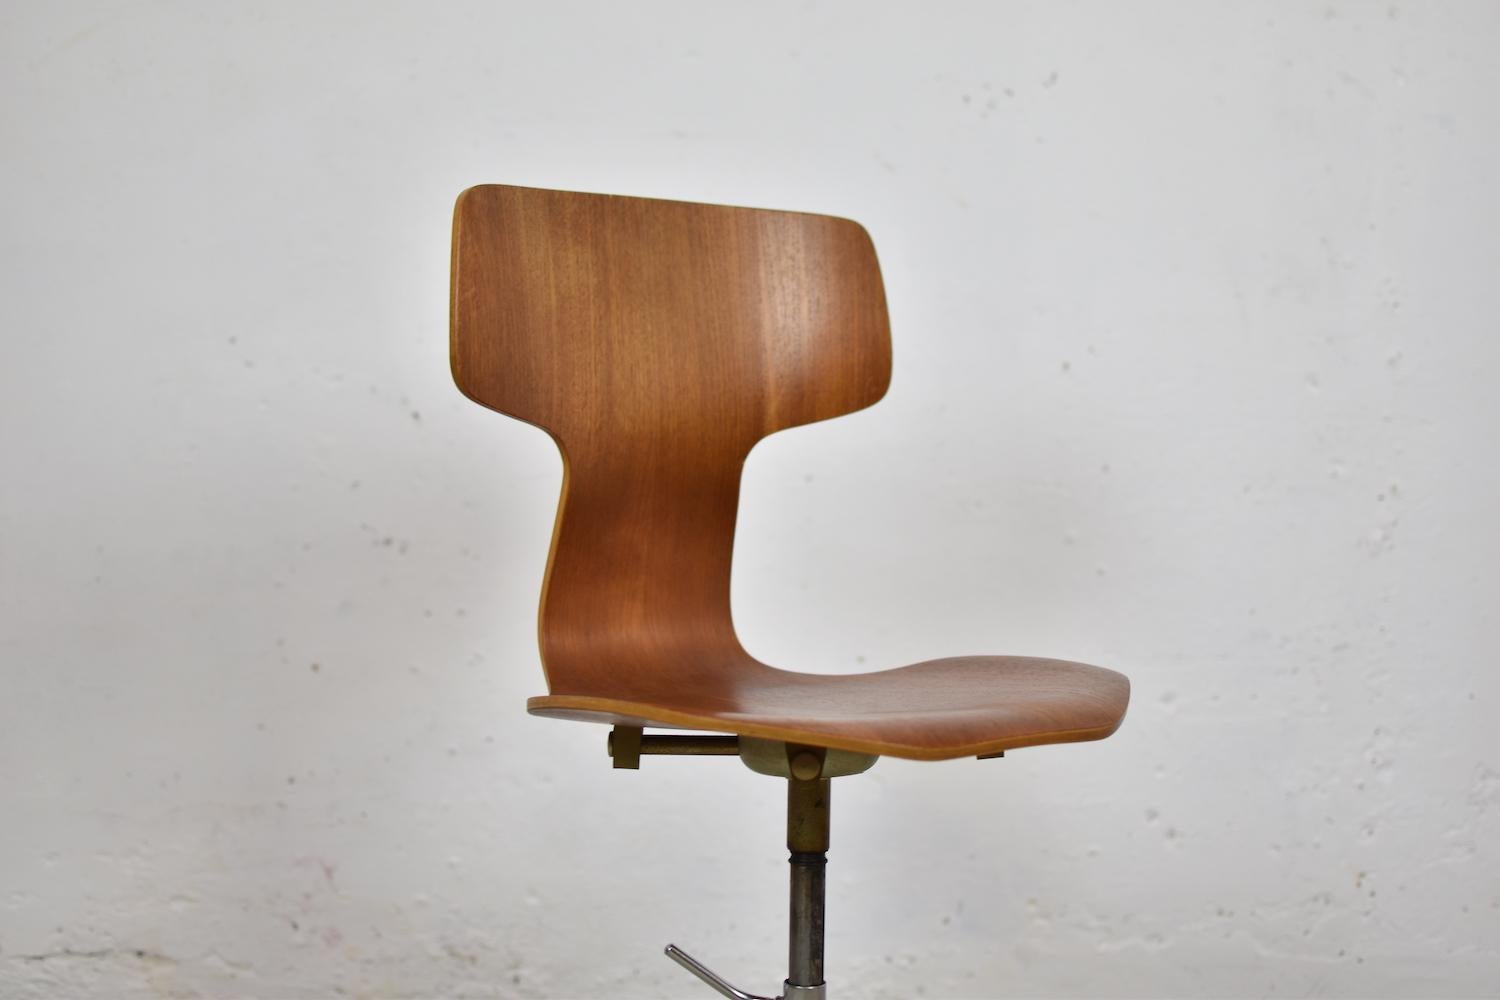 Lovely ‘3103’ desk chair designed by Arne Jacobsen for Fritz Hansen, Denmark, 1950s. This iconic Hammer chair has a base made out of a chrome tubular steel construction with a seat made of teak. Adjustable in height and in extremely good condition.